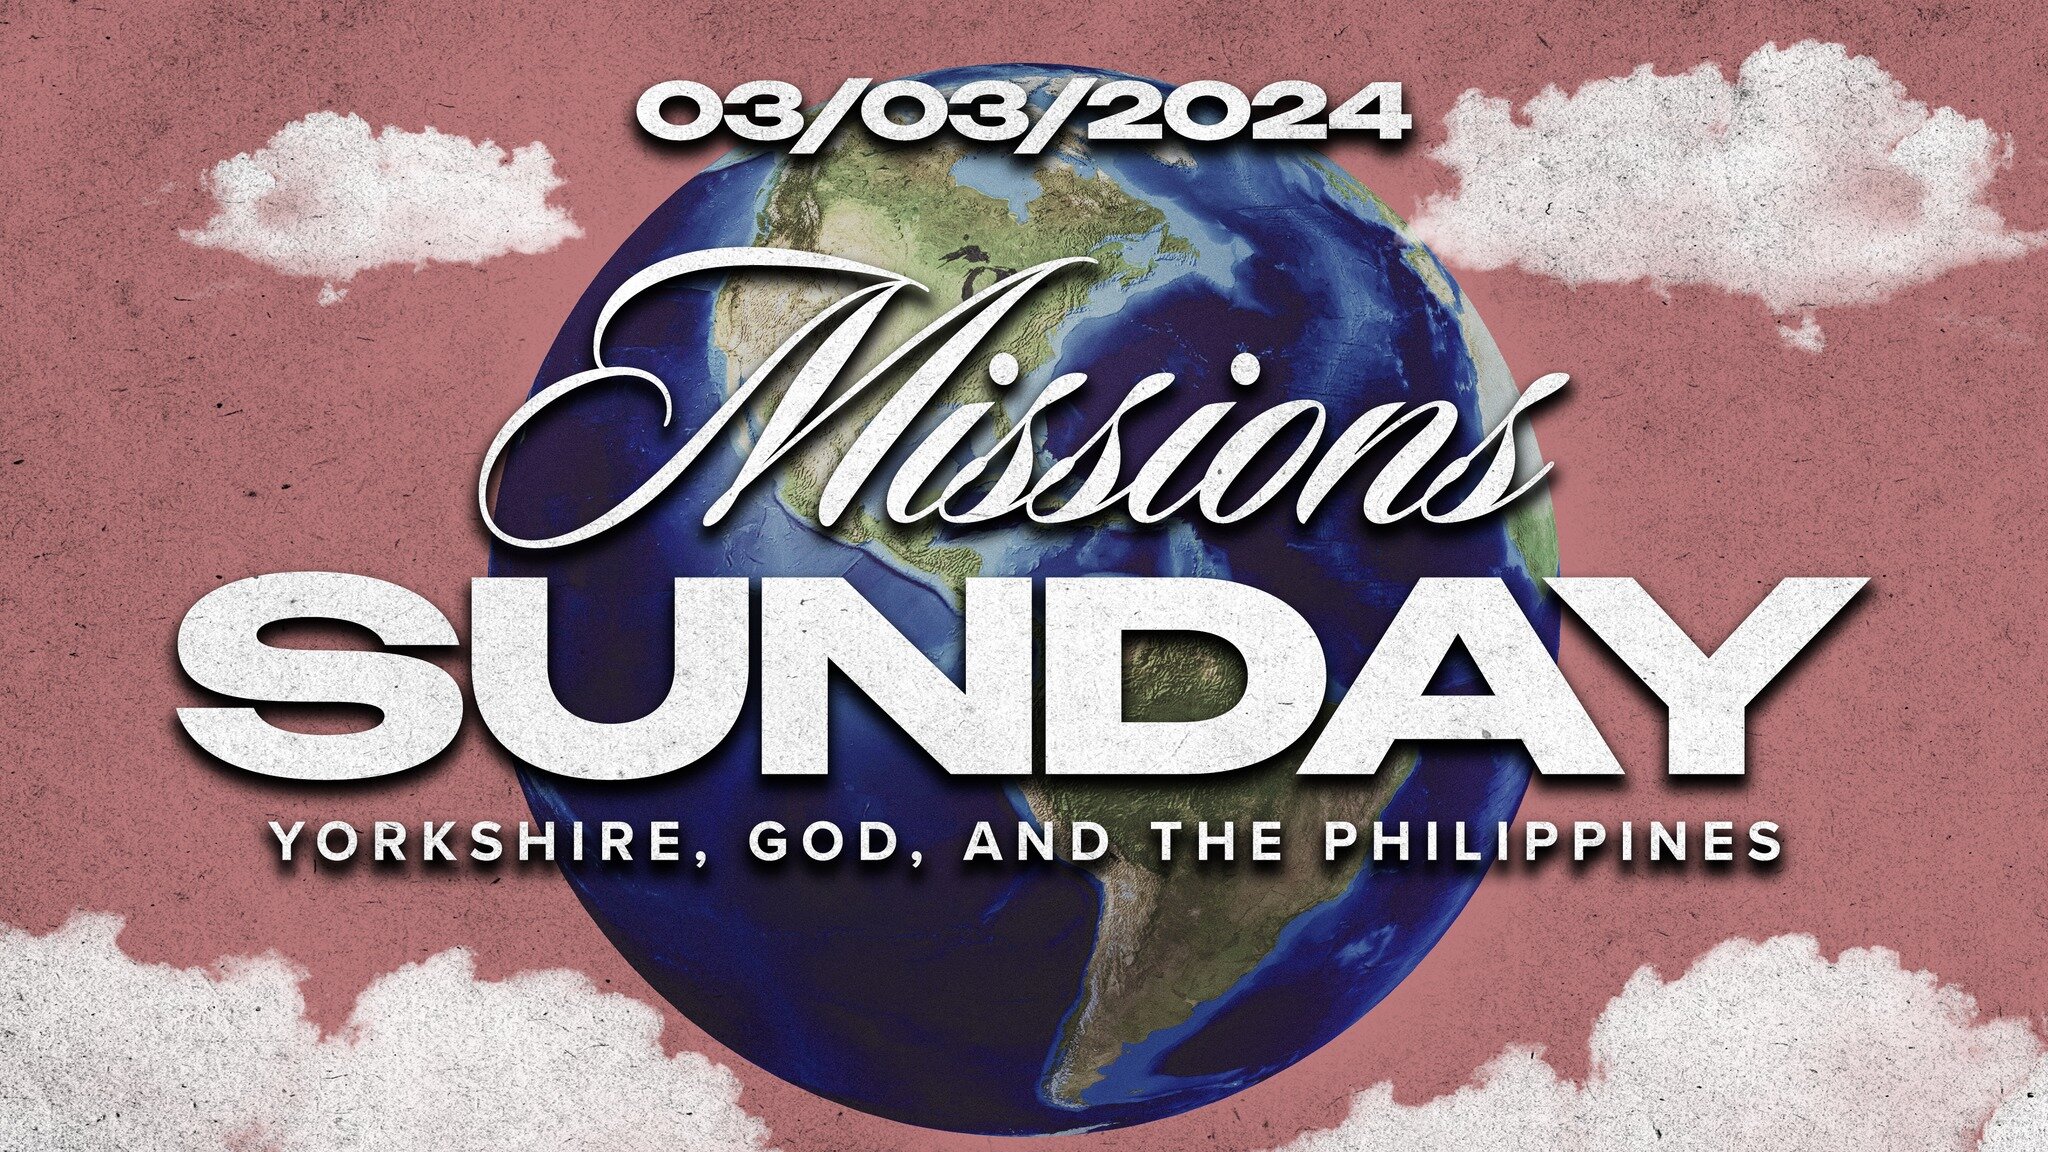 🌟 Join us this Sunday for an Extraordinary Missions Sunday at The Well Church in Wakefield! 🌍

We're thrilled to have a special guest joining us via Zoom all the way from the Philippines: Lynette Orange, our amazing missionary!

Get ready to be ins